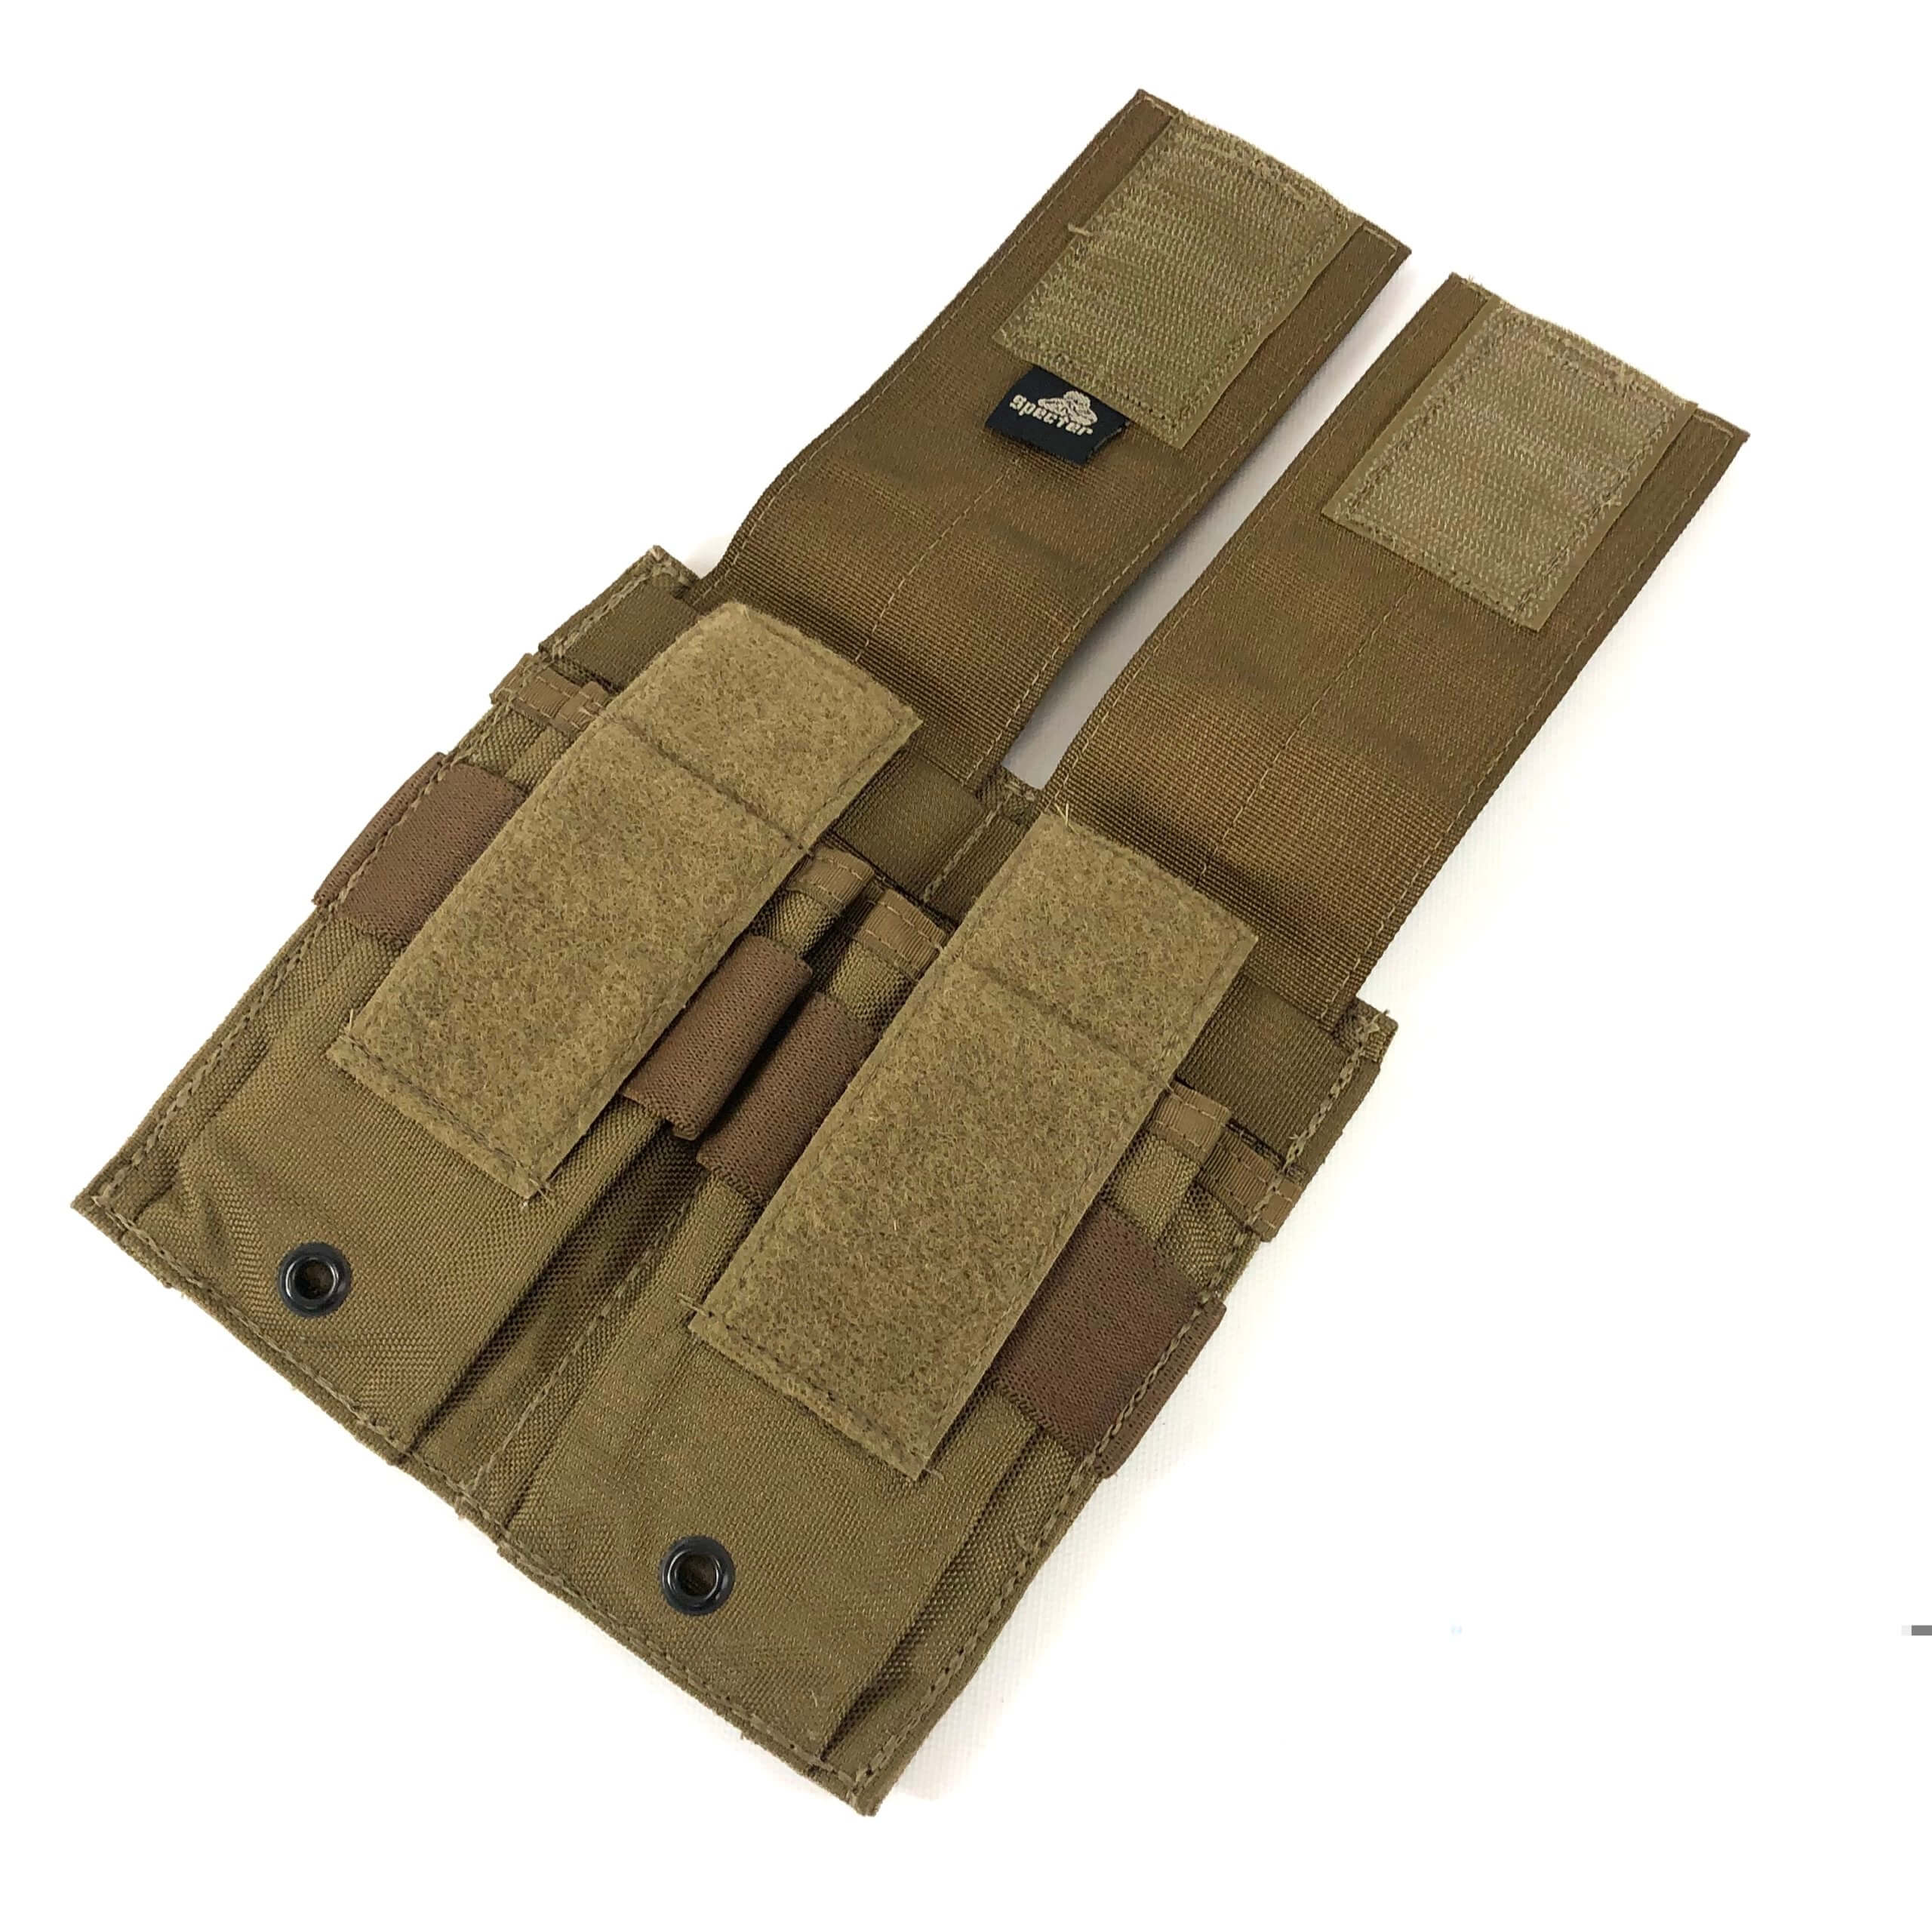 Details about   Specter Gear Mag Pouch Military Double 2x2 Magazine Coyote Brown USMC 